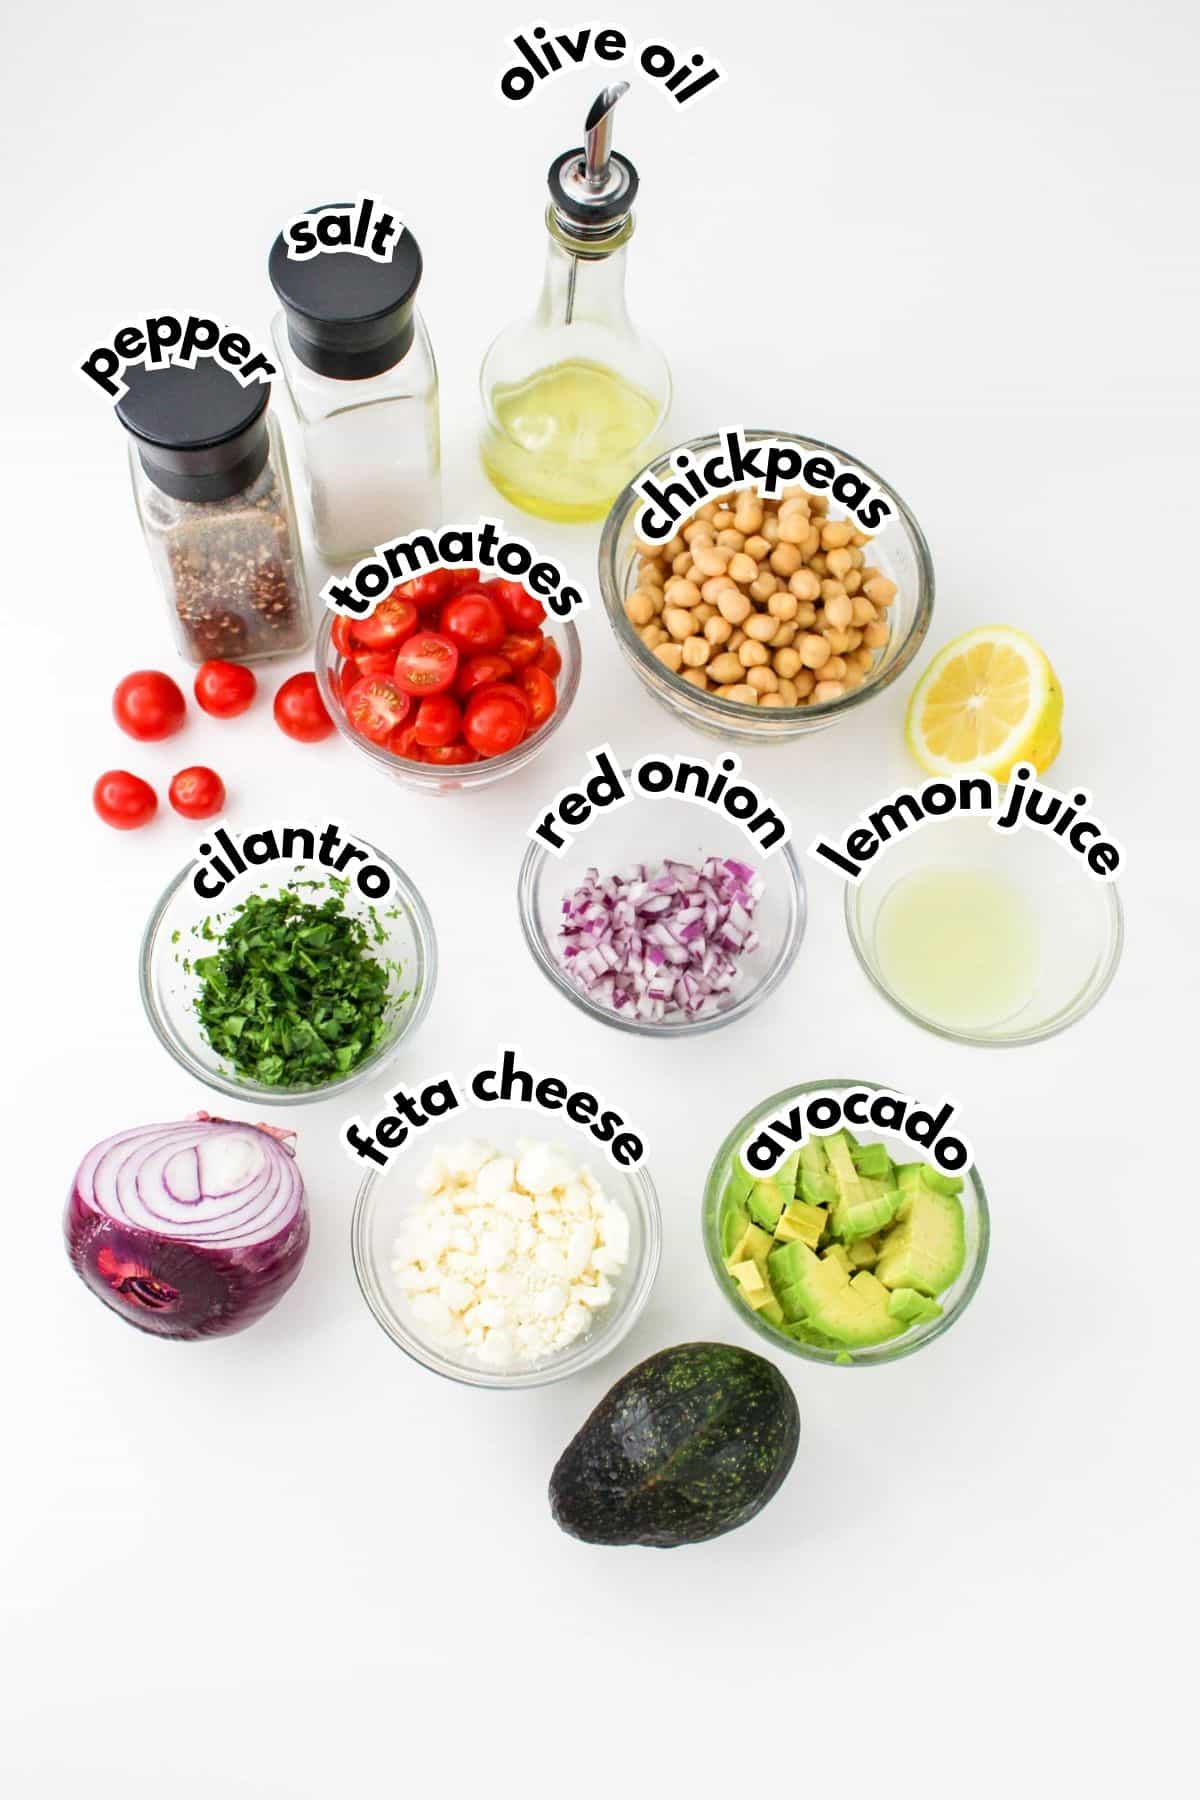 bowls of salt, pepper,olive oil, tomatoes, chickpeas, cilantro, red onion, lemon juice, feta cheese, and avocado on a counter.